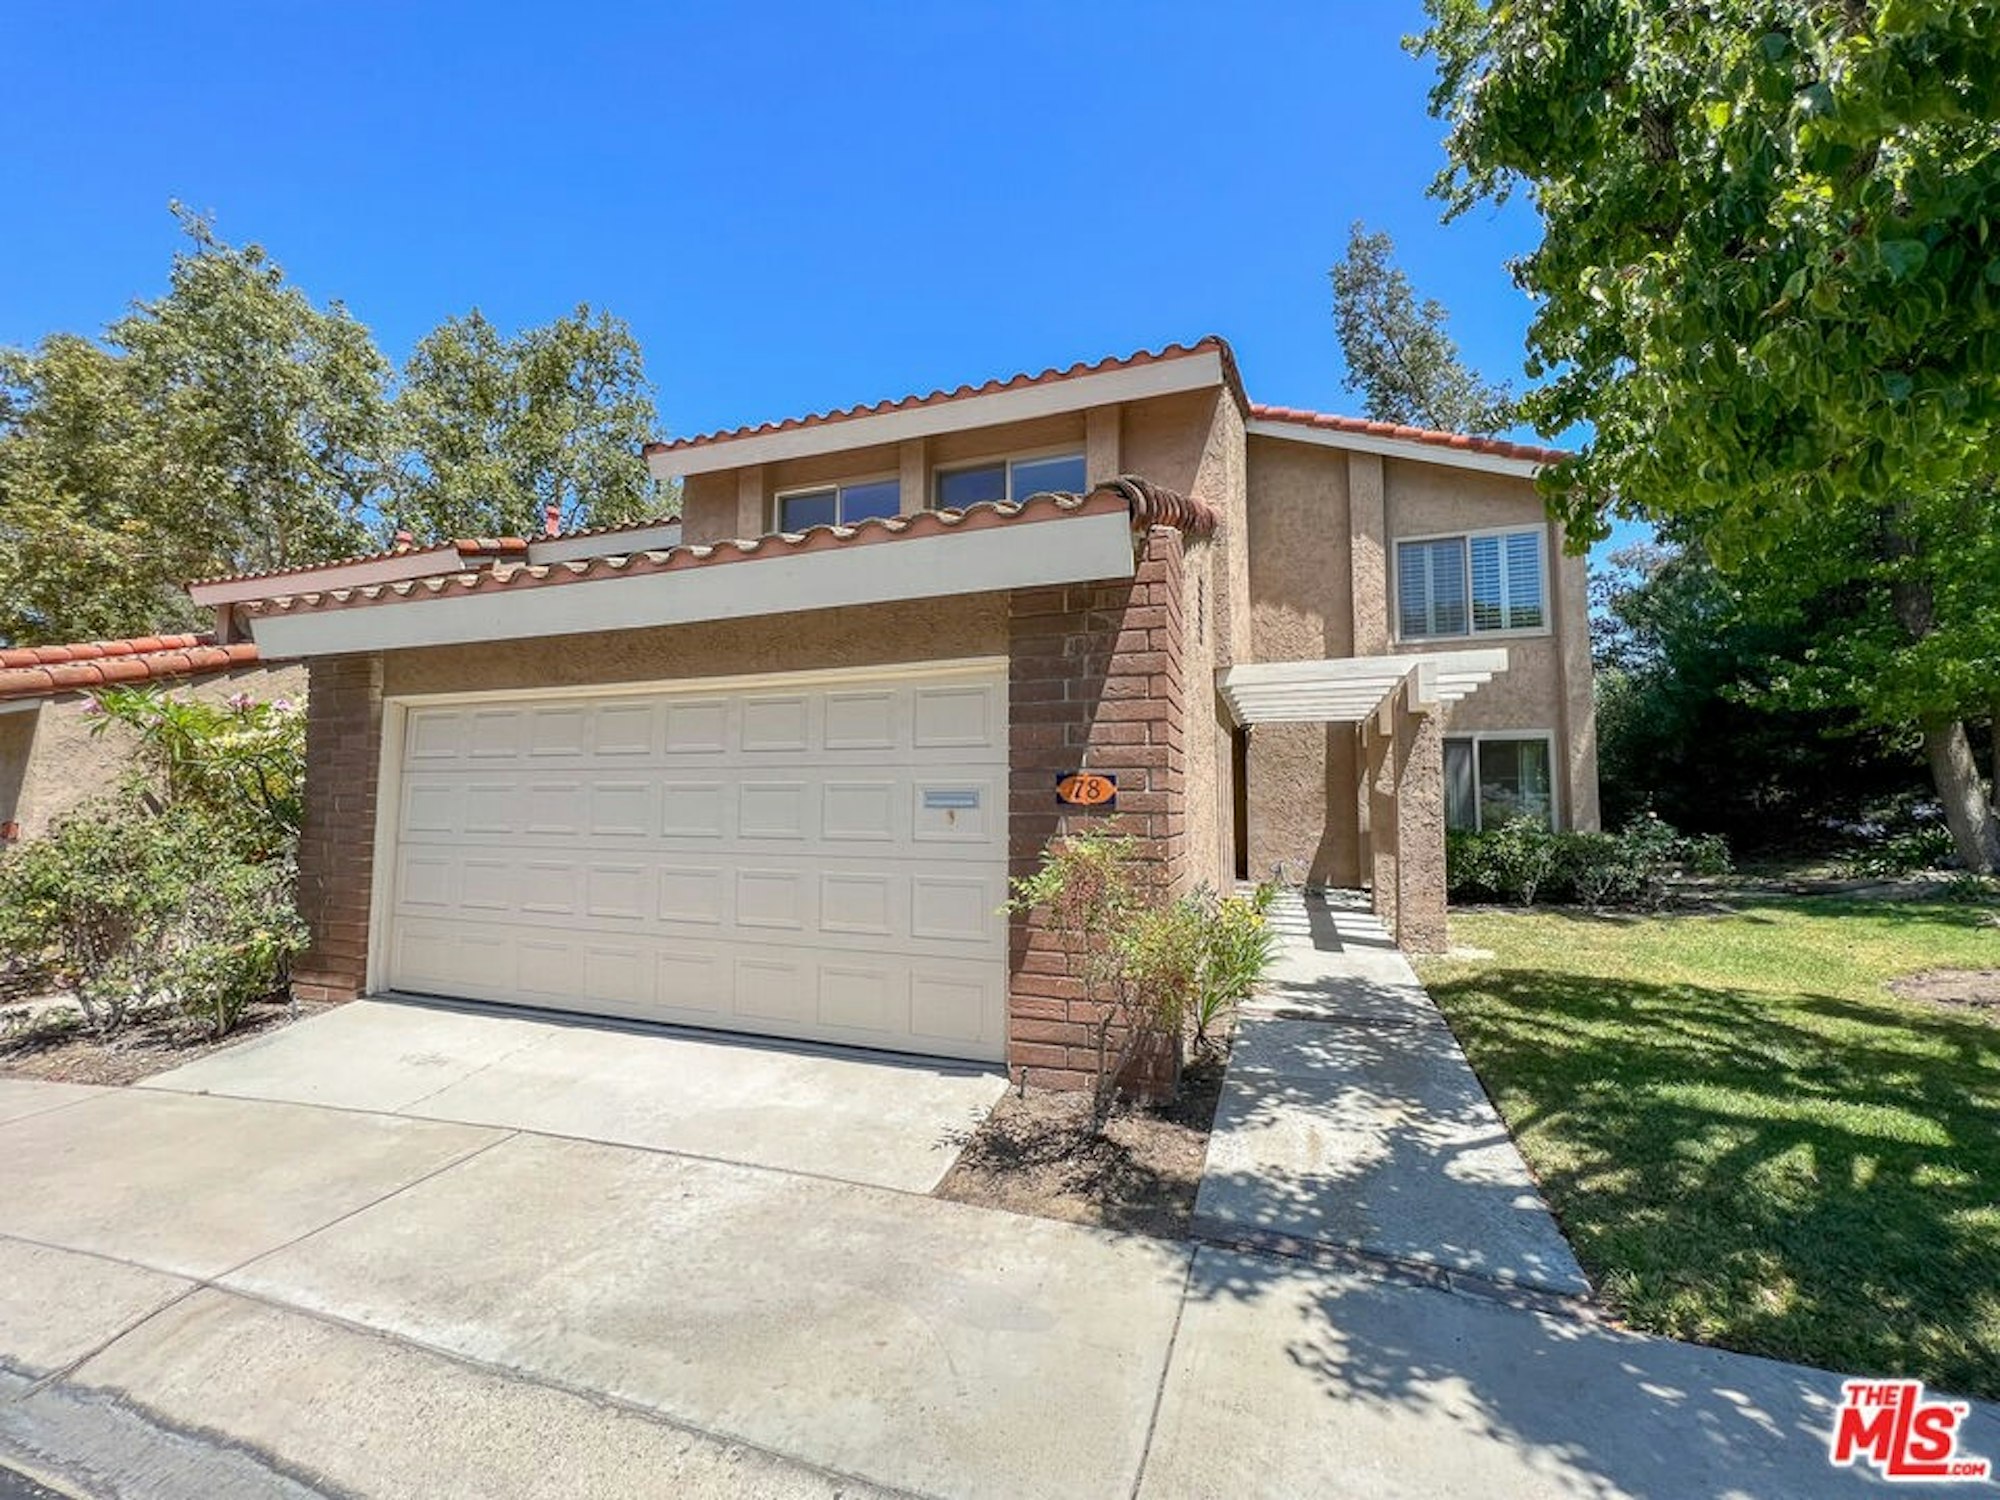 Photo 1 of 19 - 6401 E Nohl Ranch Rd #78, Anaheim, CA 92807